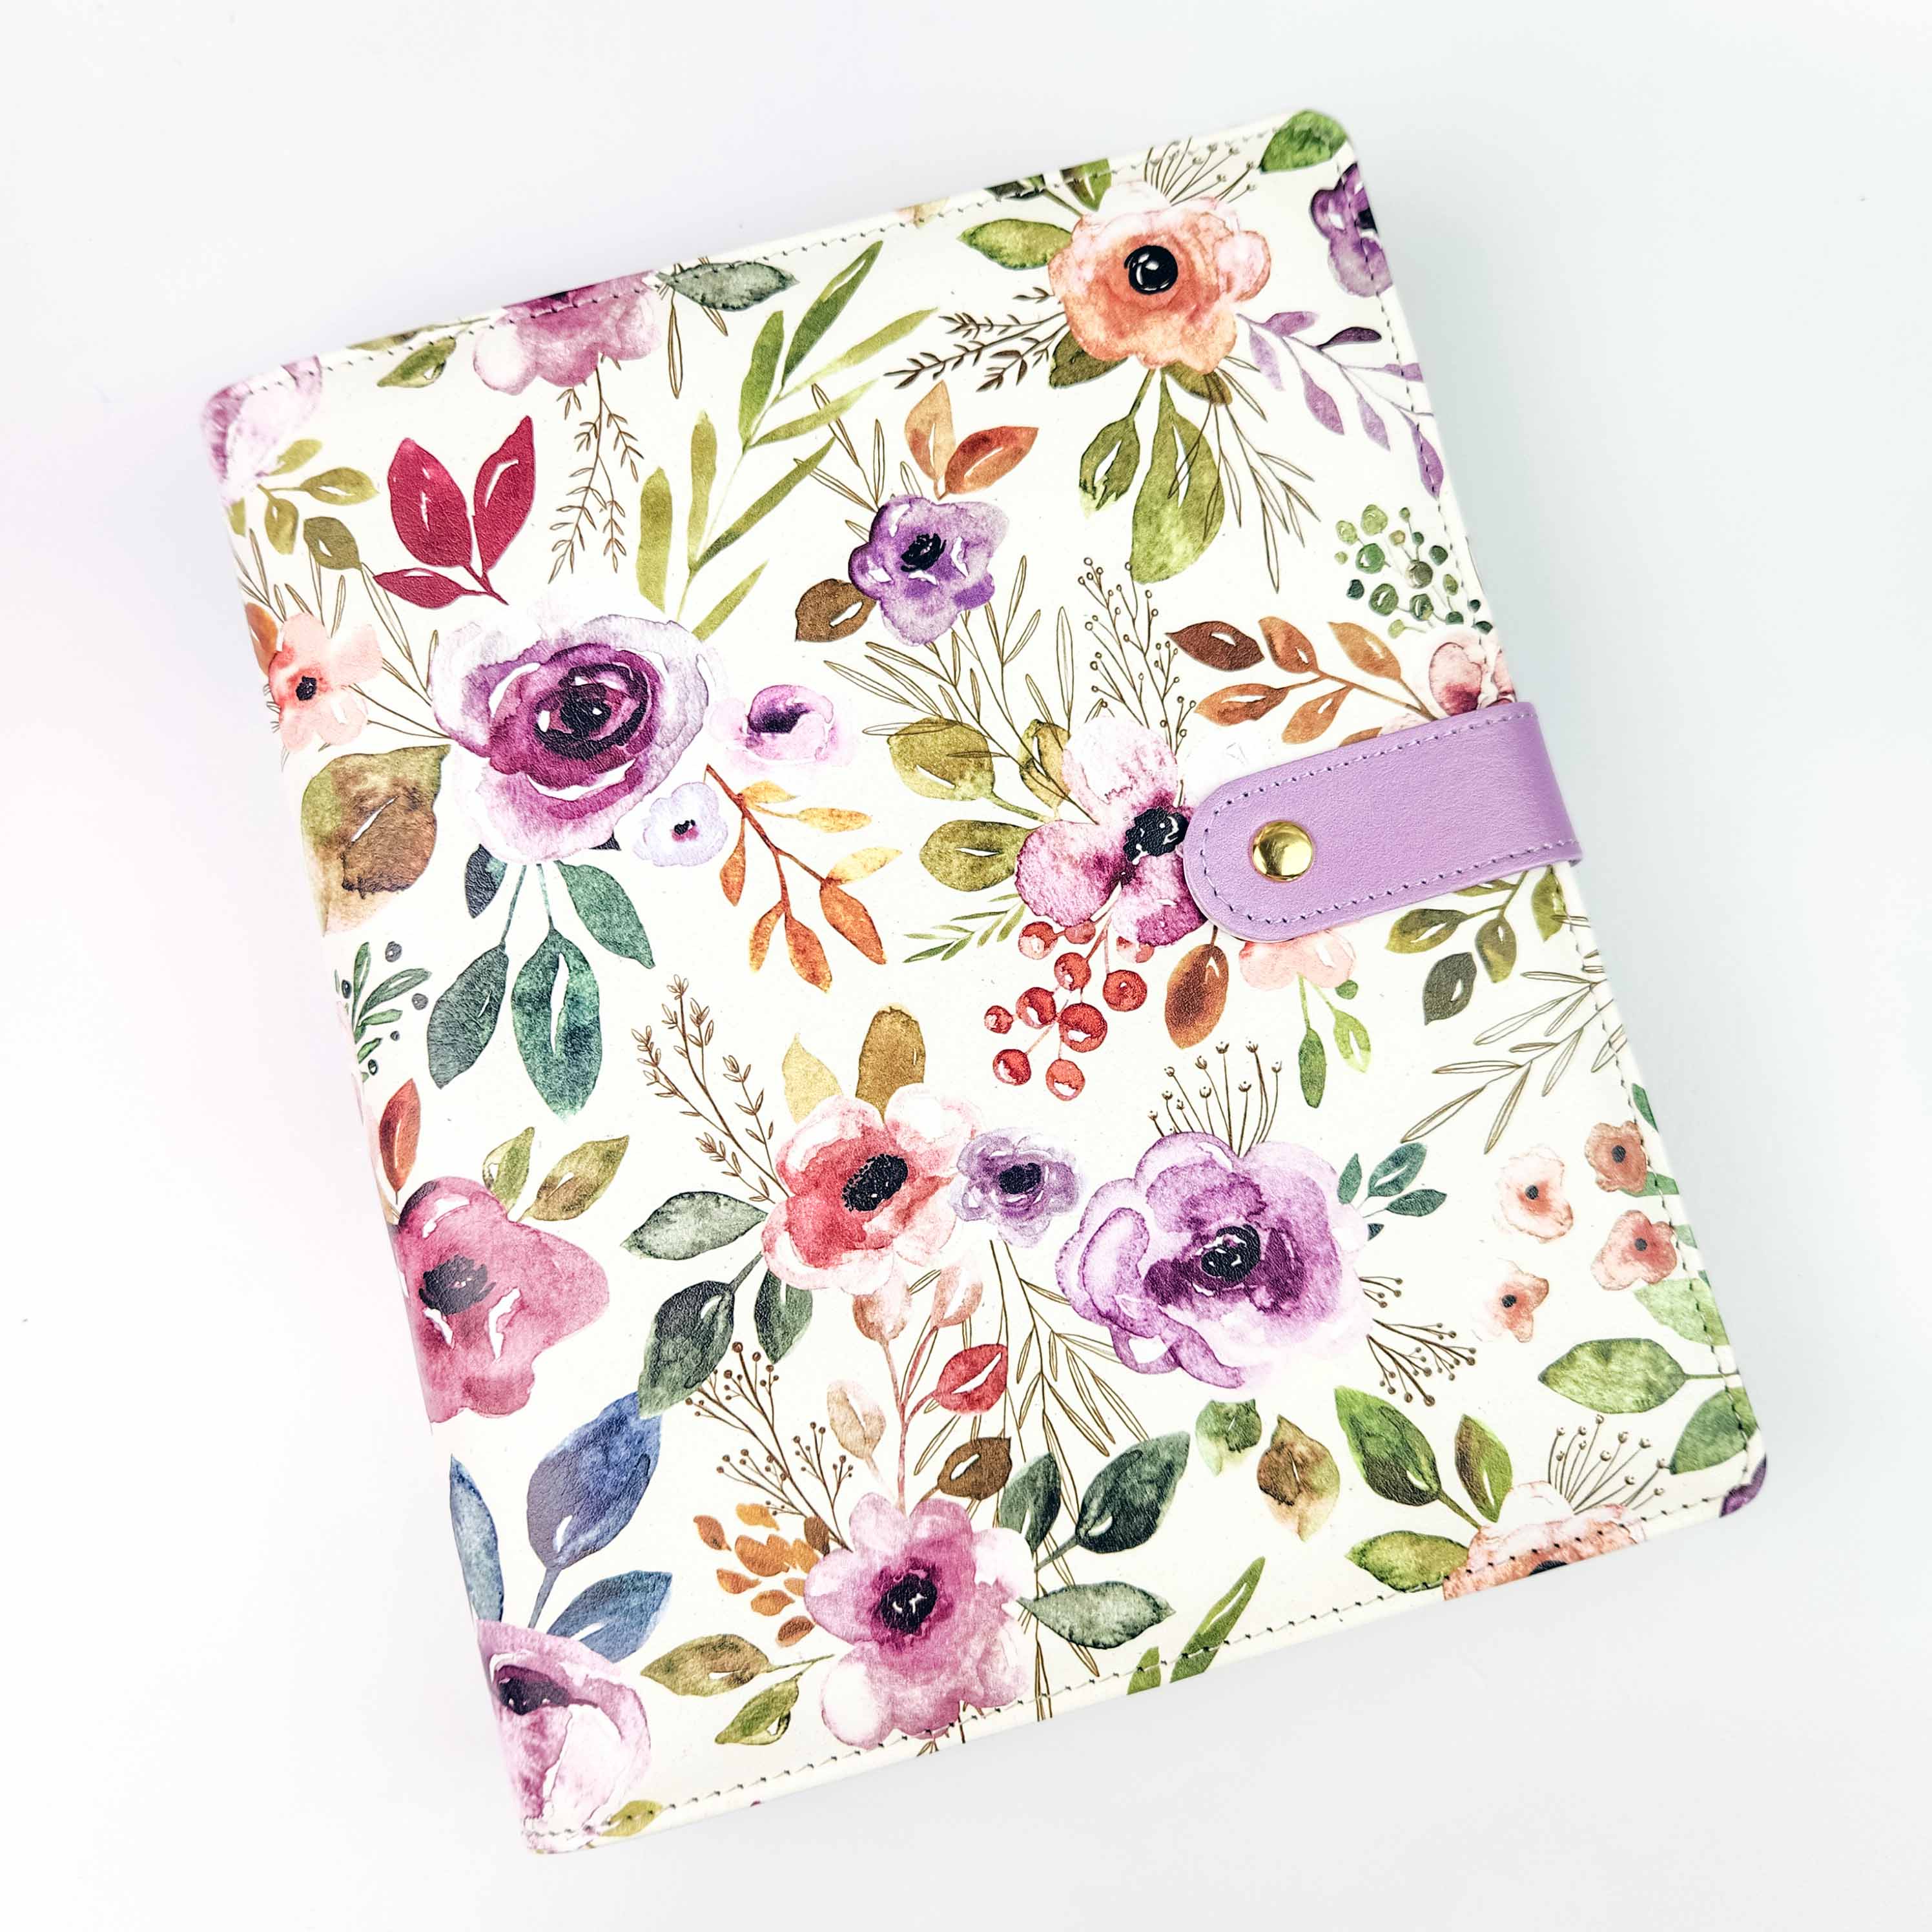 Spring Floral Project Journal Planner for Knitters & Crocheters